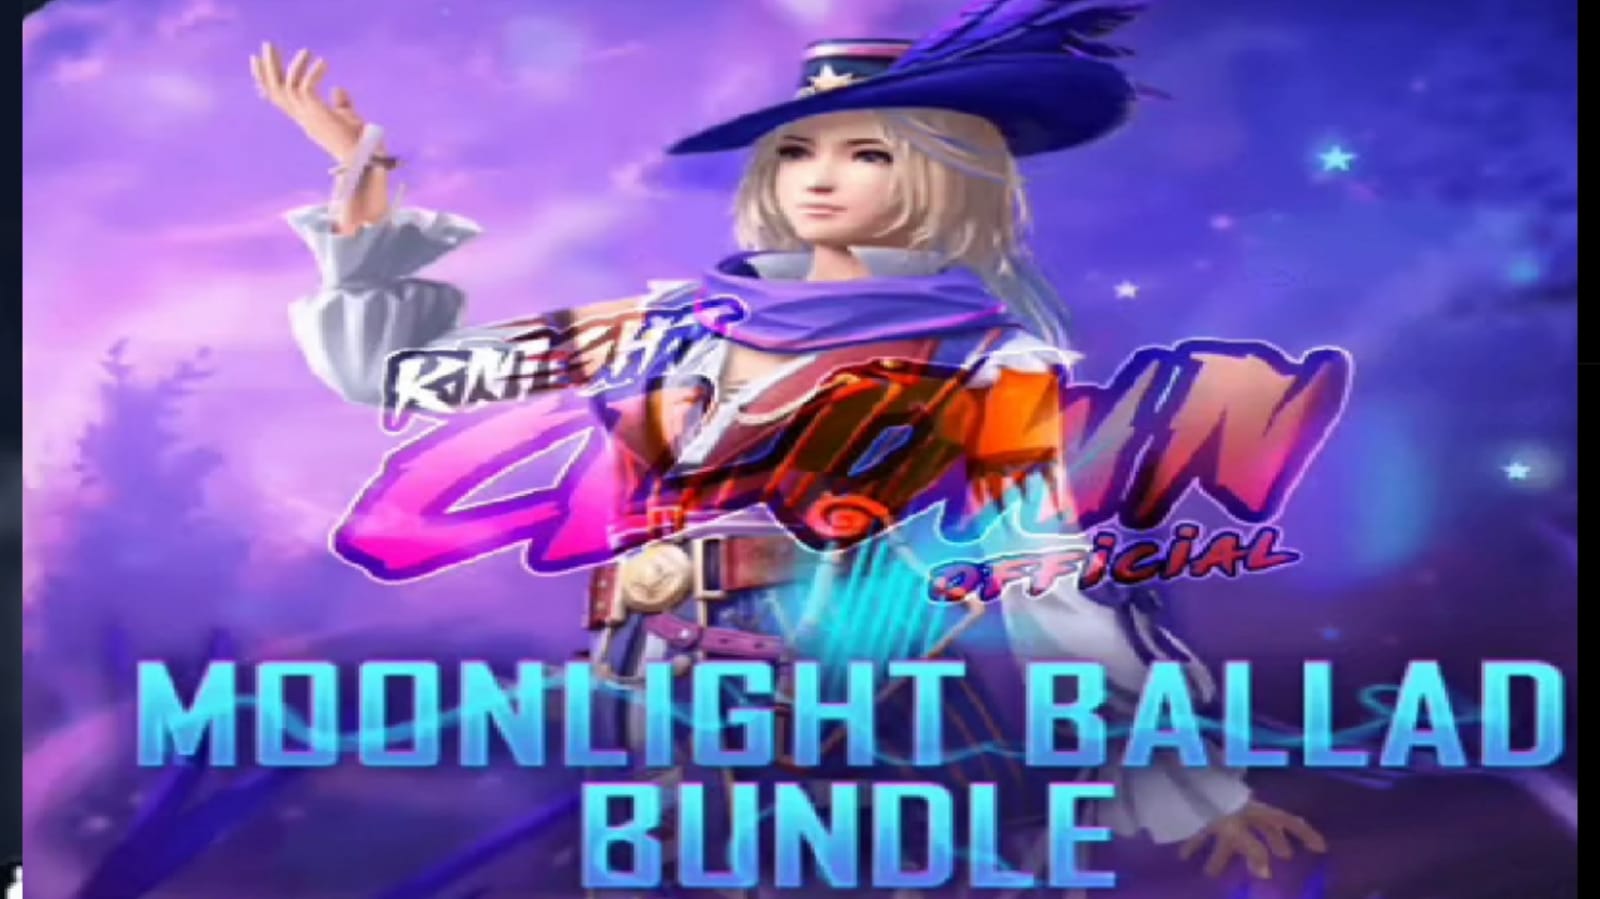 Free Fire Diamond Royale Event: Get Moonlight Ballad Bundle and many items from the Next Diamond Royale Event